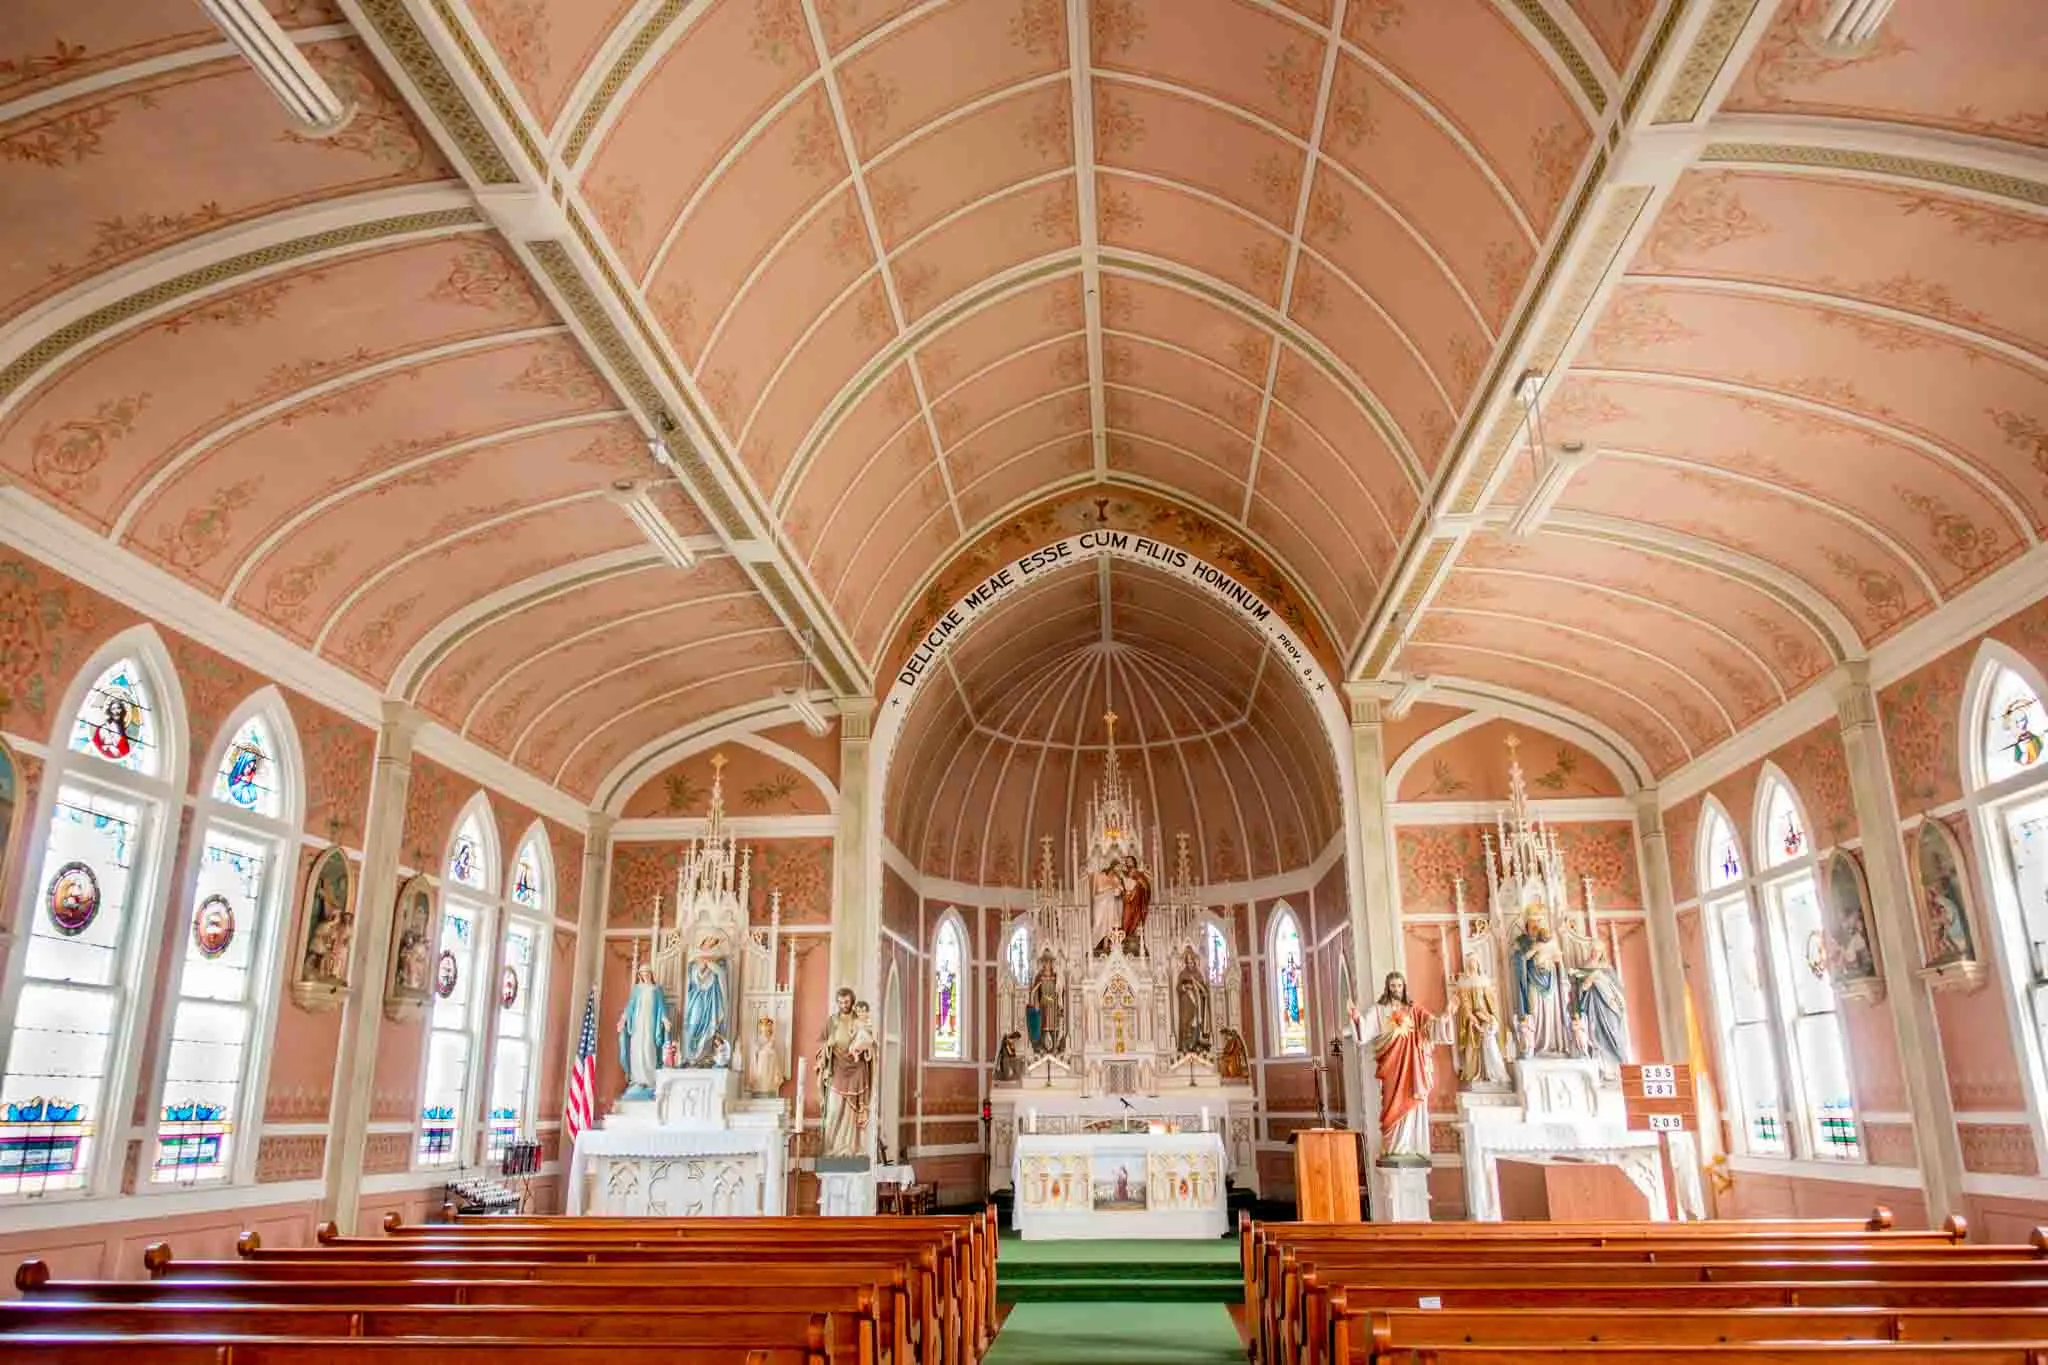 Pink sanctuary of St. John the Baptist with religious statues